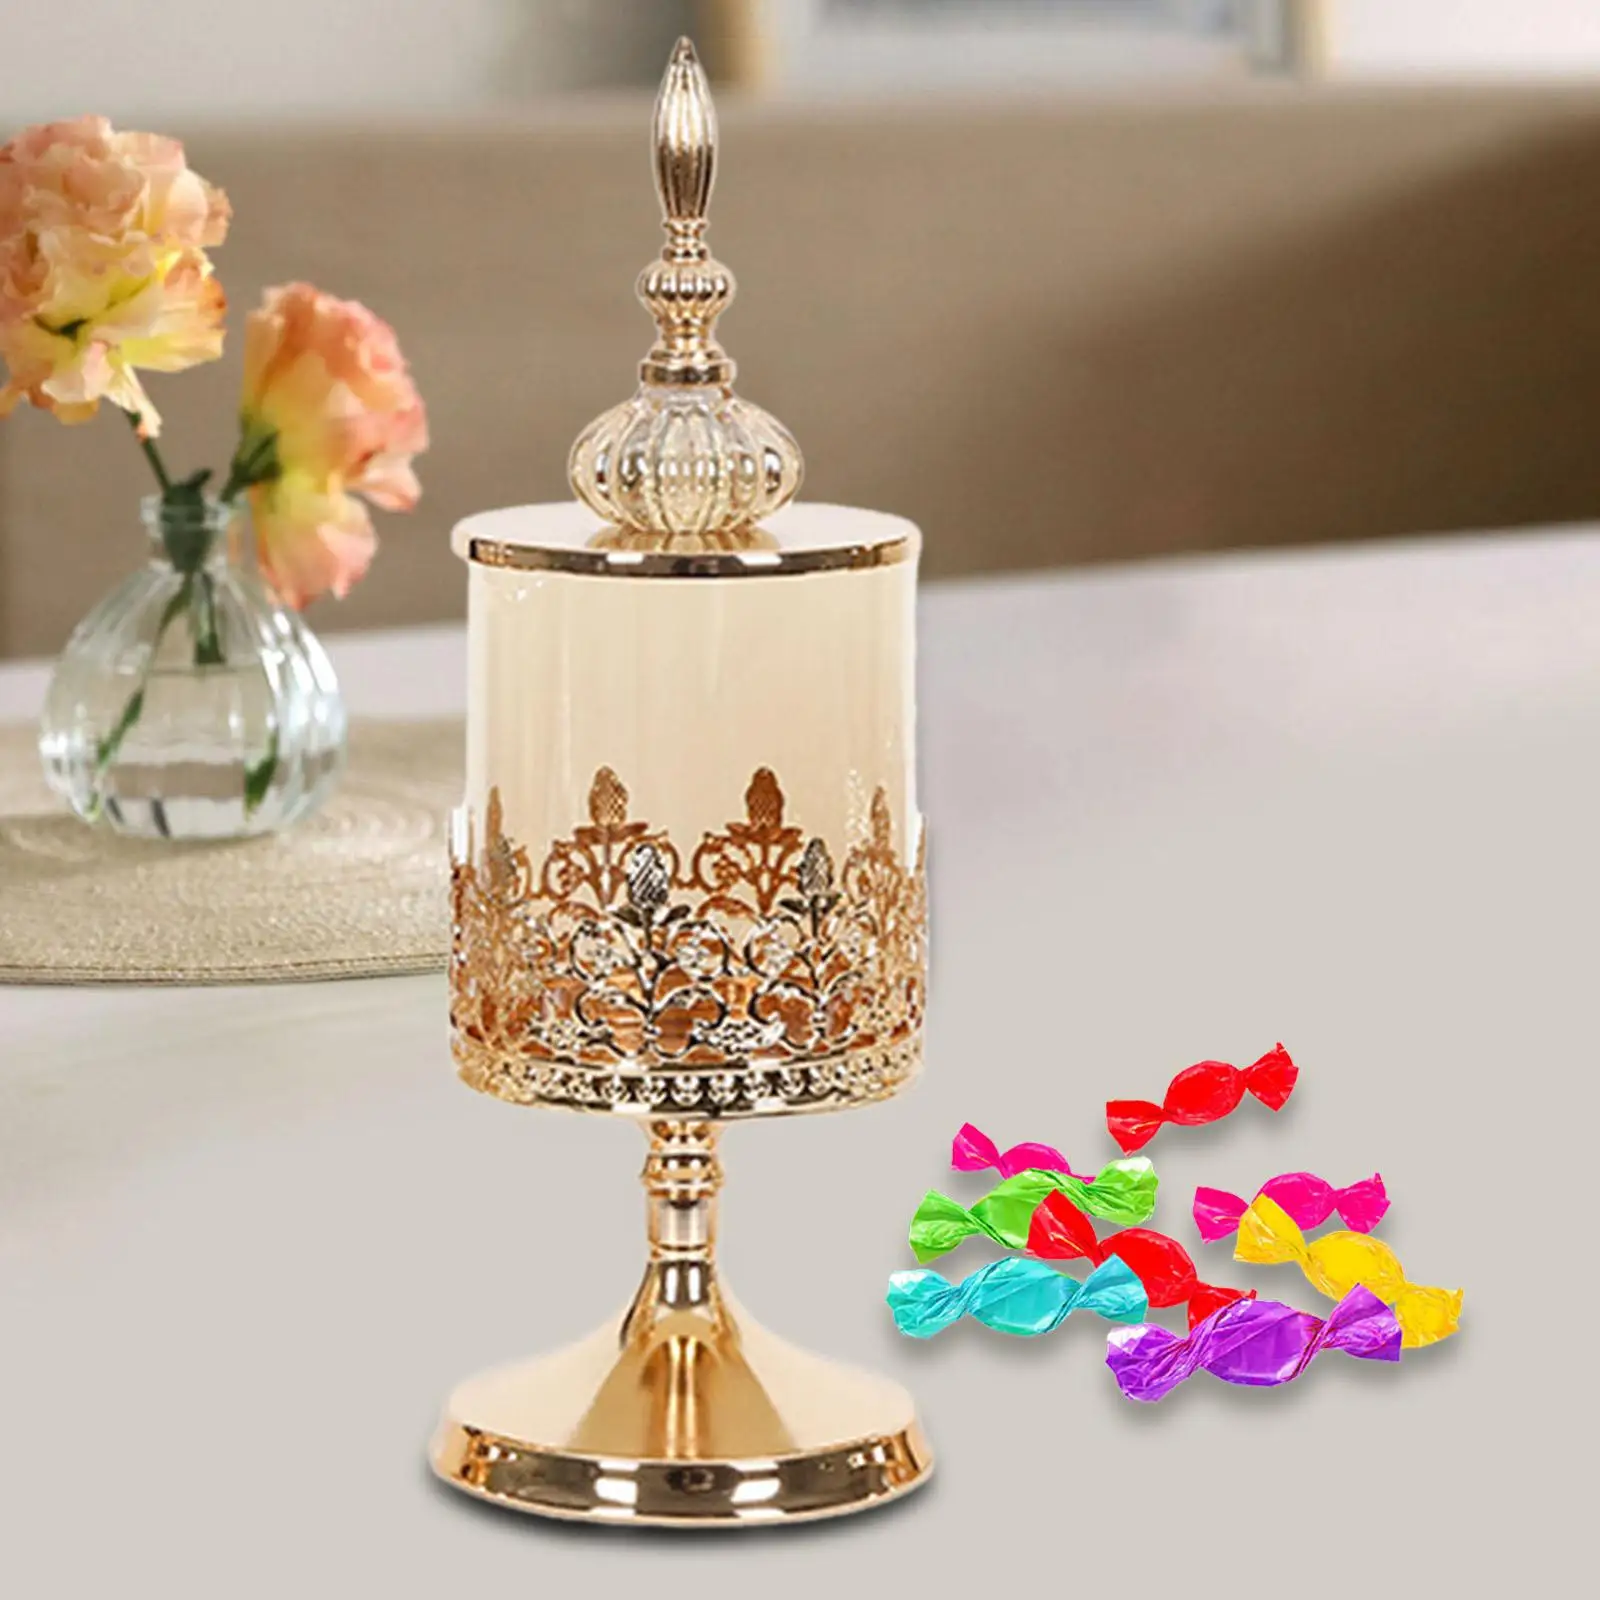 European Style Decorative Candy Jar Candle Holder with Lid Cupcake Stand Dessert Candy Dish for Wedding Christmas Room Home